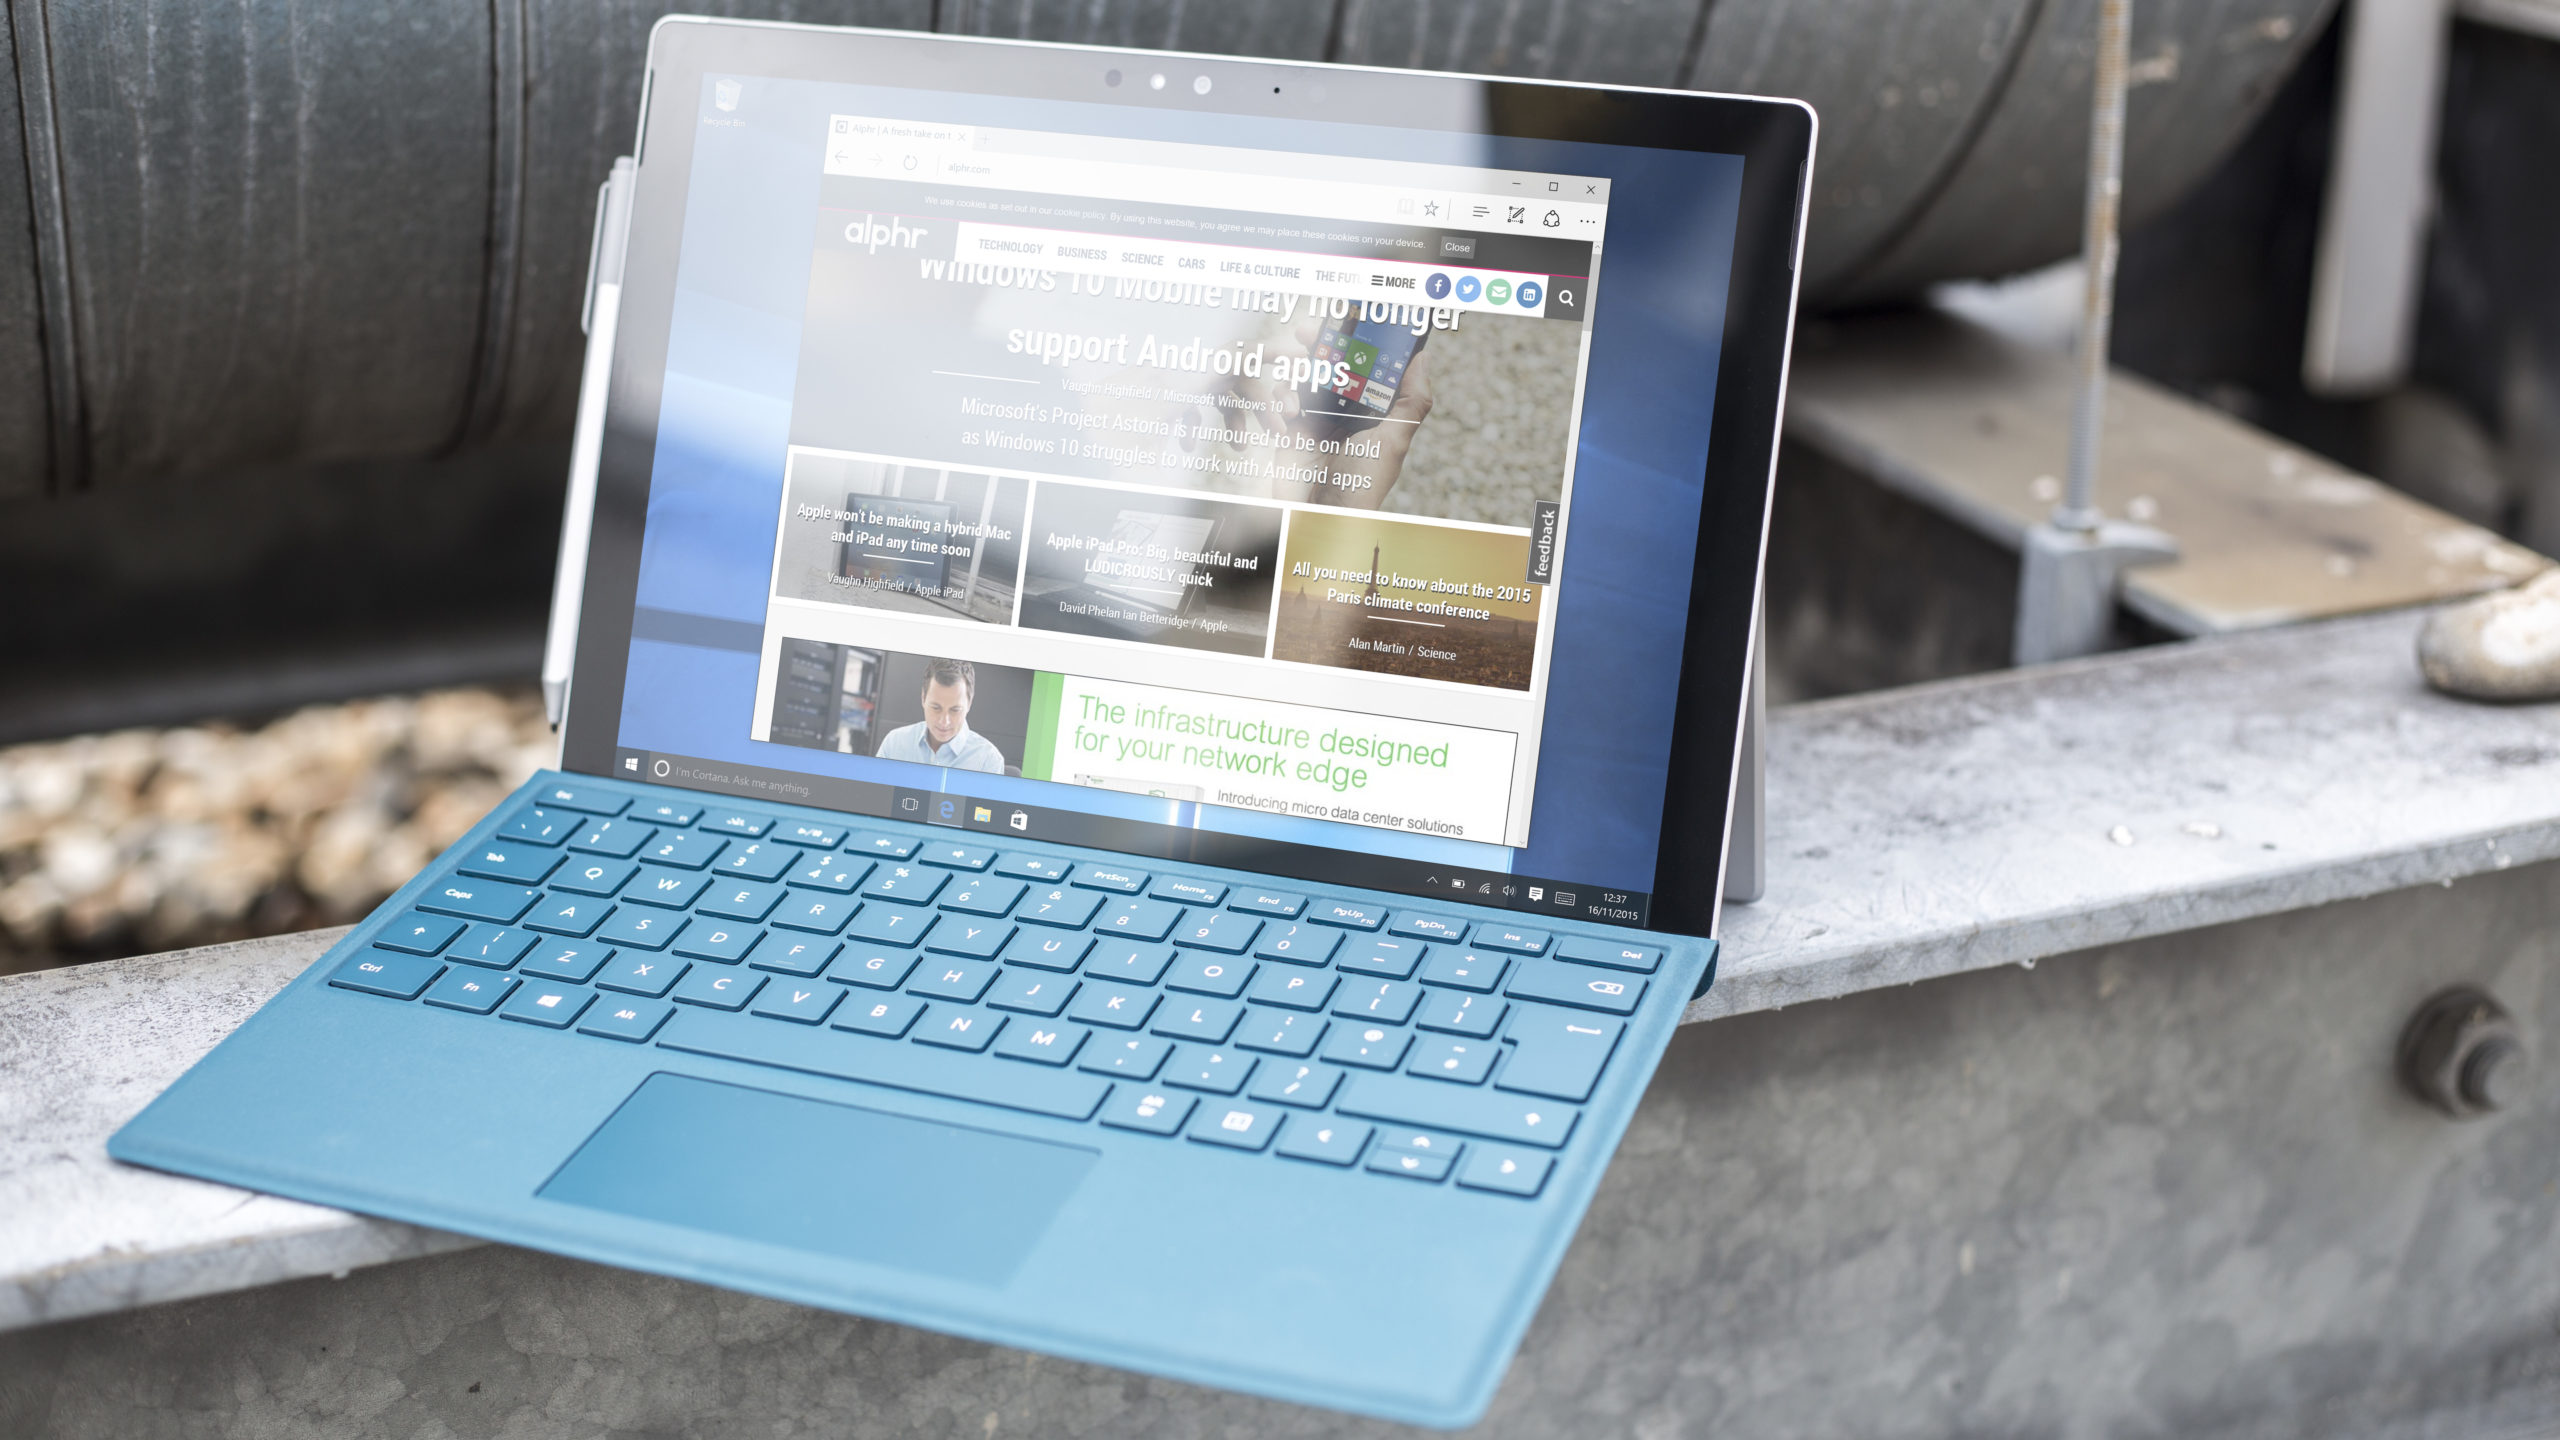 Microsoft Surface Pro 4 review: A bargain at £649